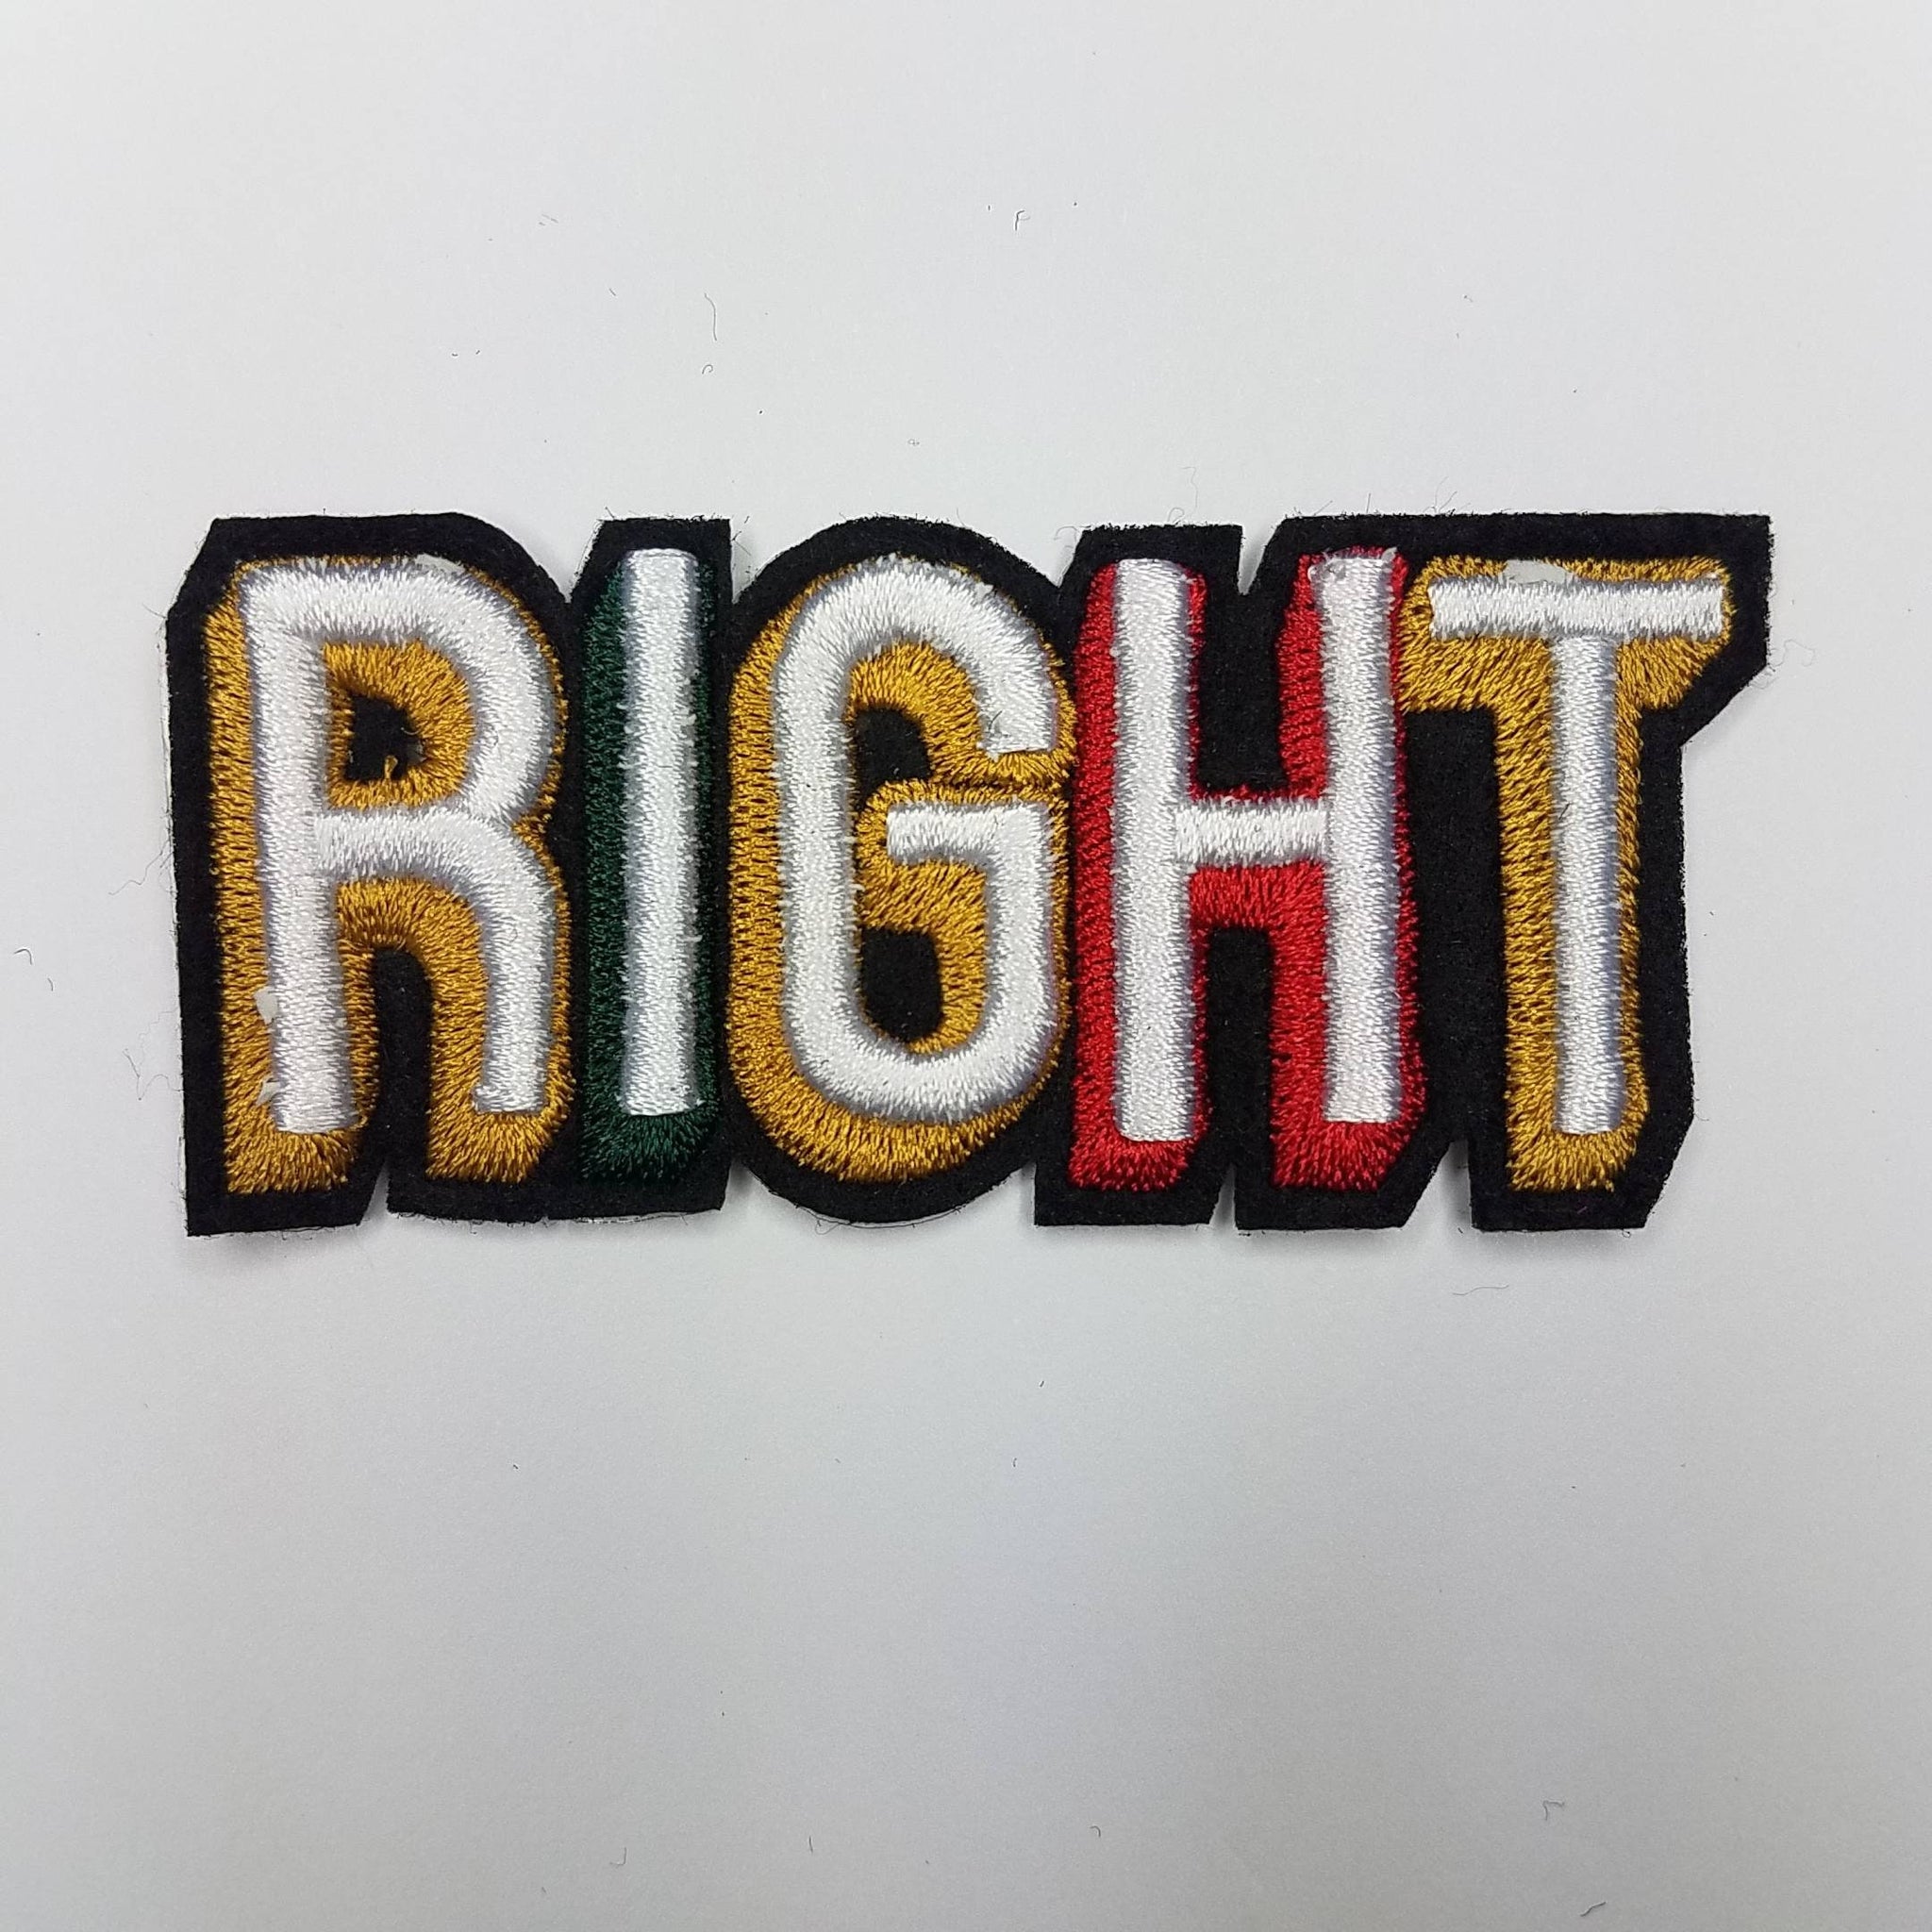 Vintage "RIGHT" Patch, Gold, Green, and Red Iron-On Embroidered Applique; Patch for Clothing, Size 3"x1", 1-piece